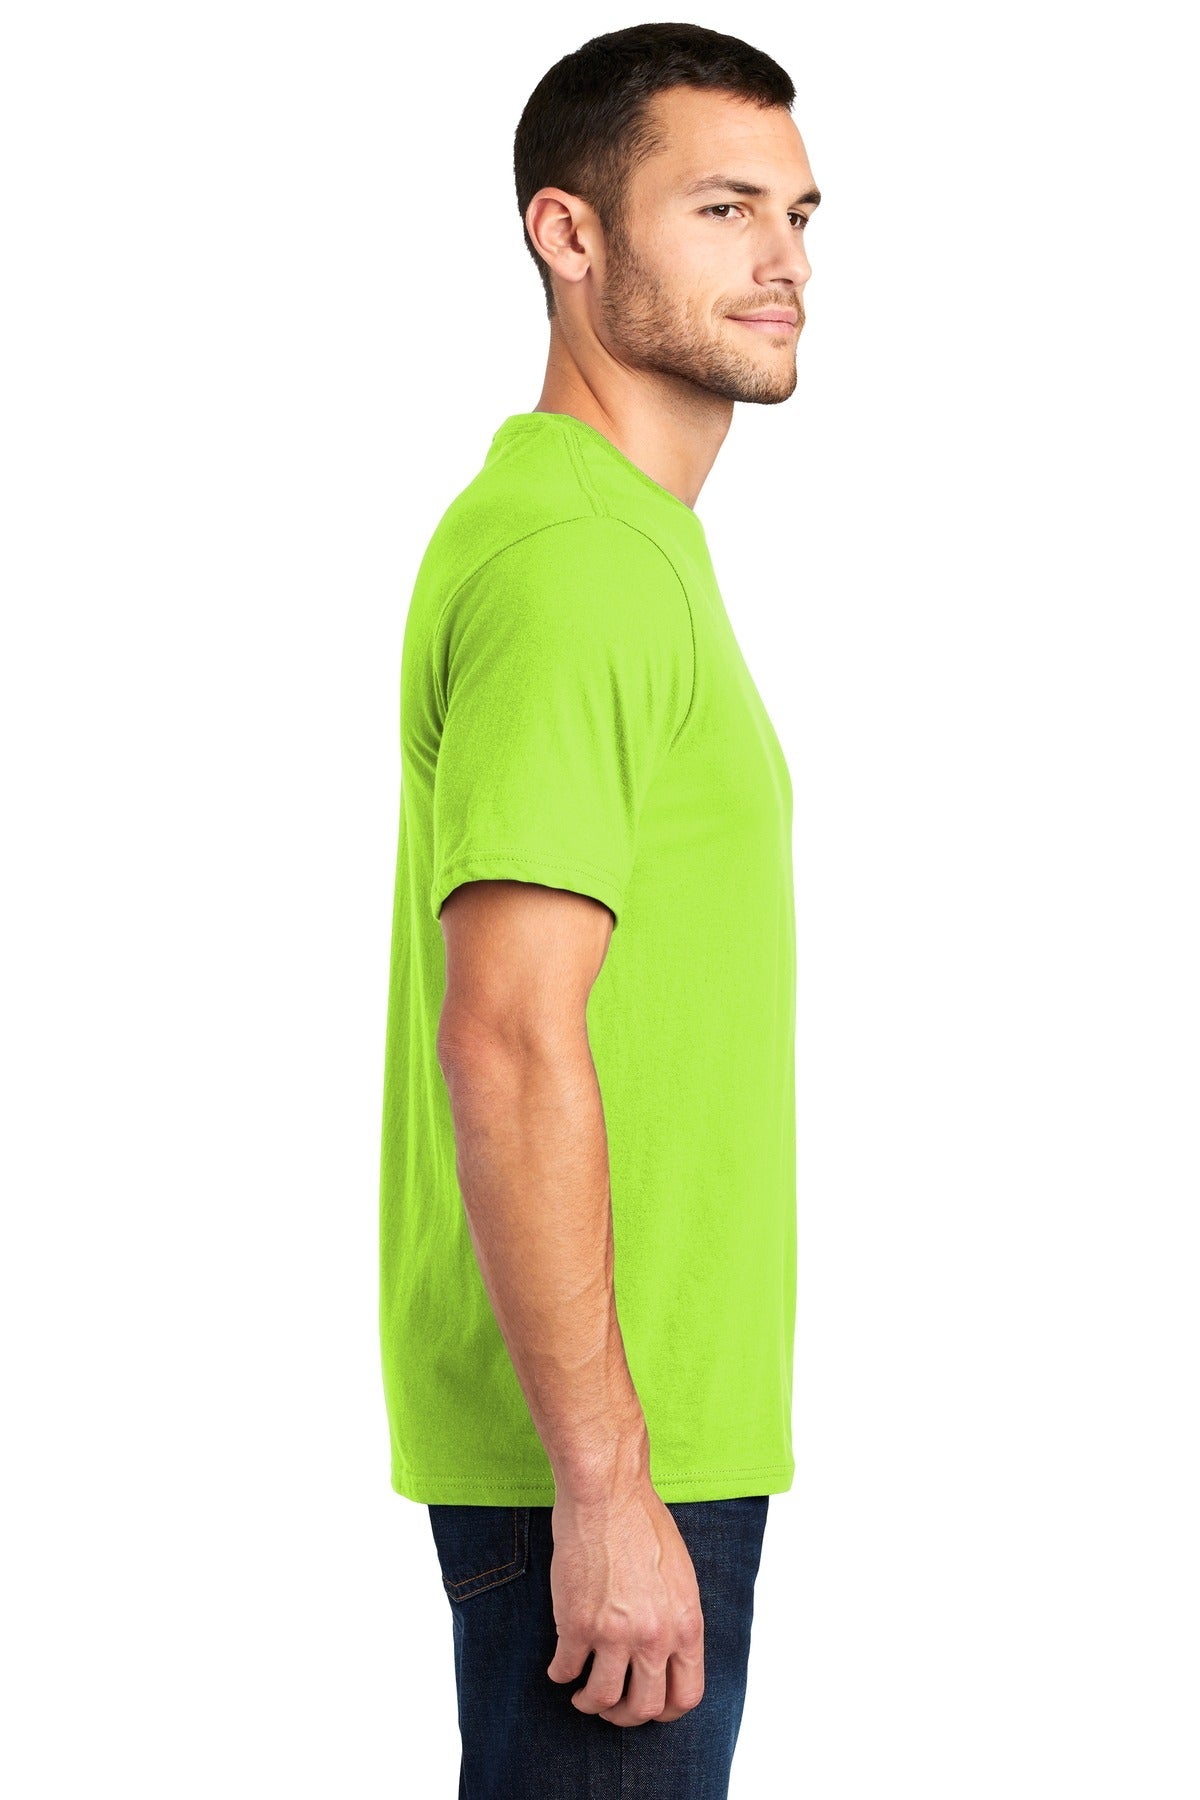 District® Very Important Tee®. DT6000 [Lime Shock] - DFW Impression